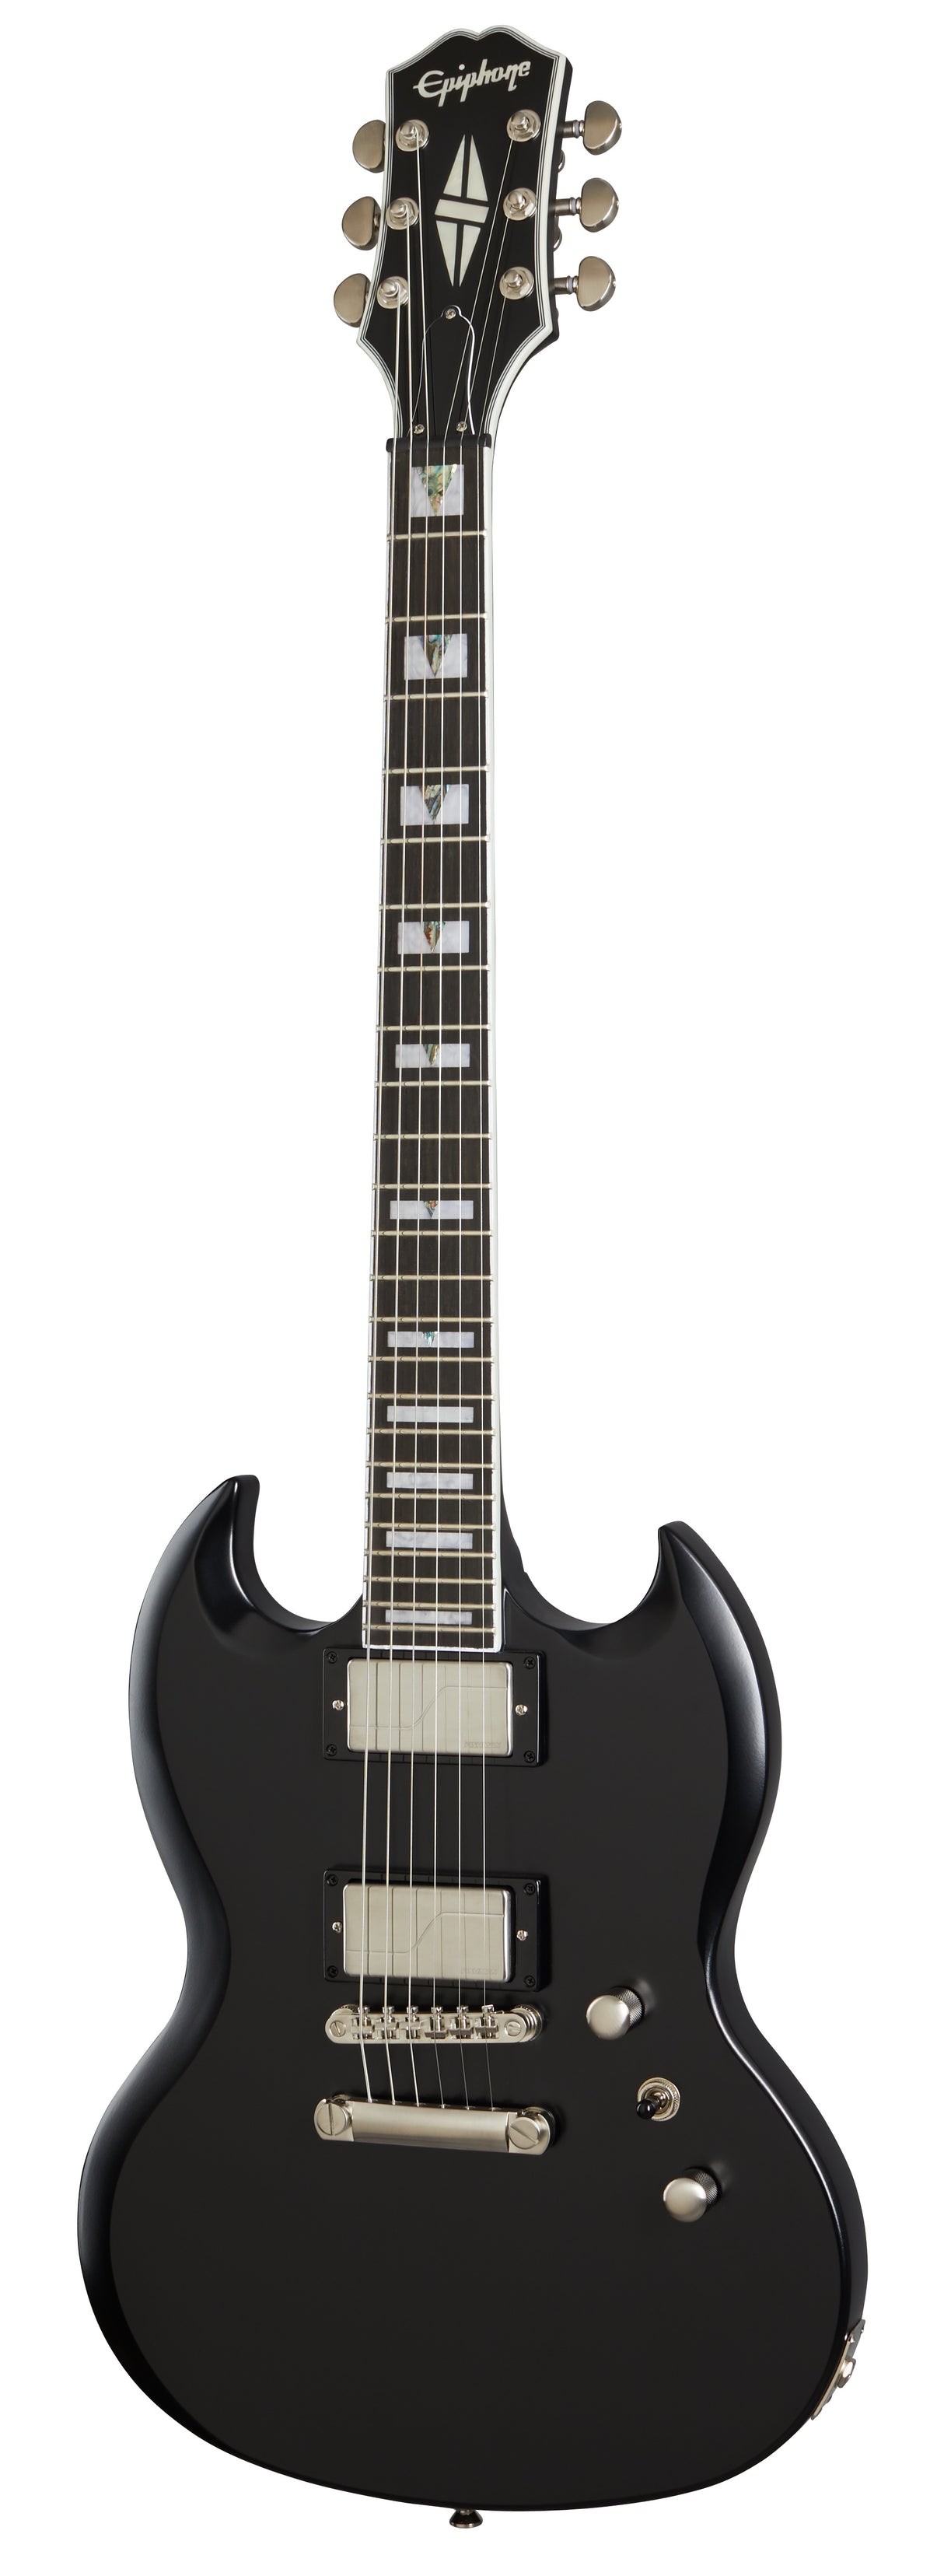 Epiphone Prophecy SG Electric Guitar, Black Aged Gloss